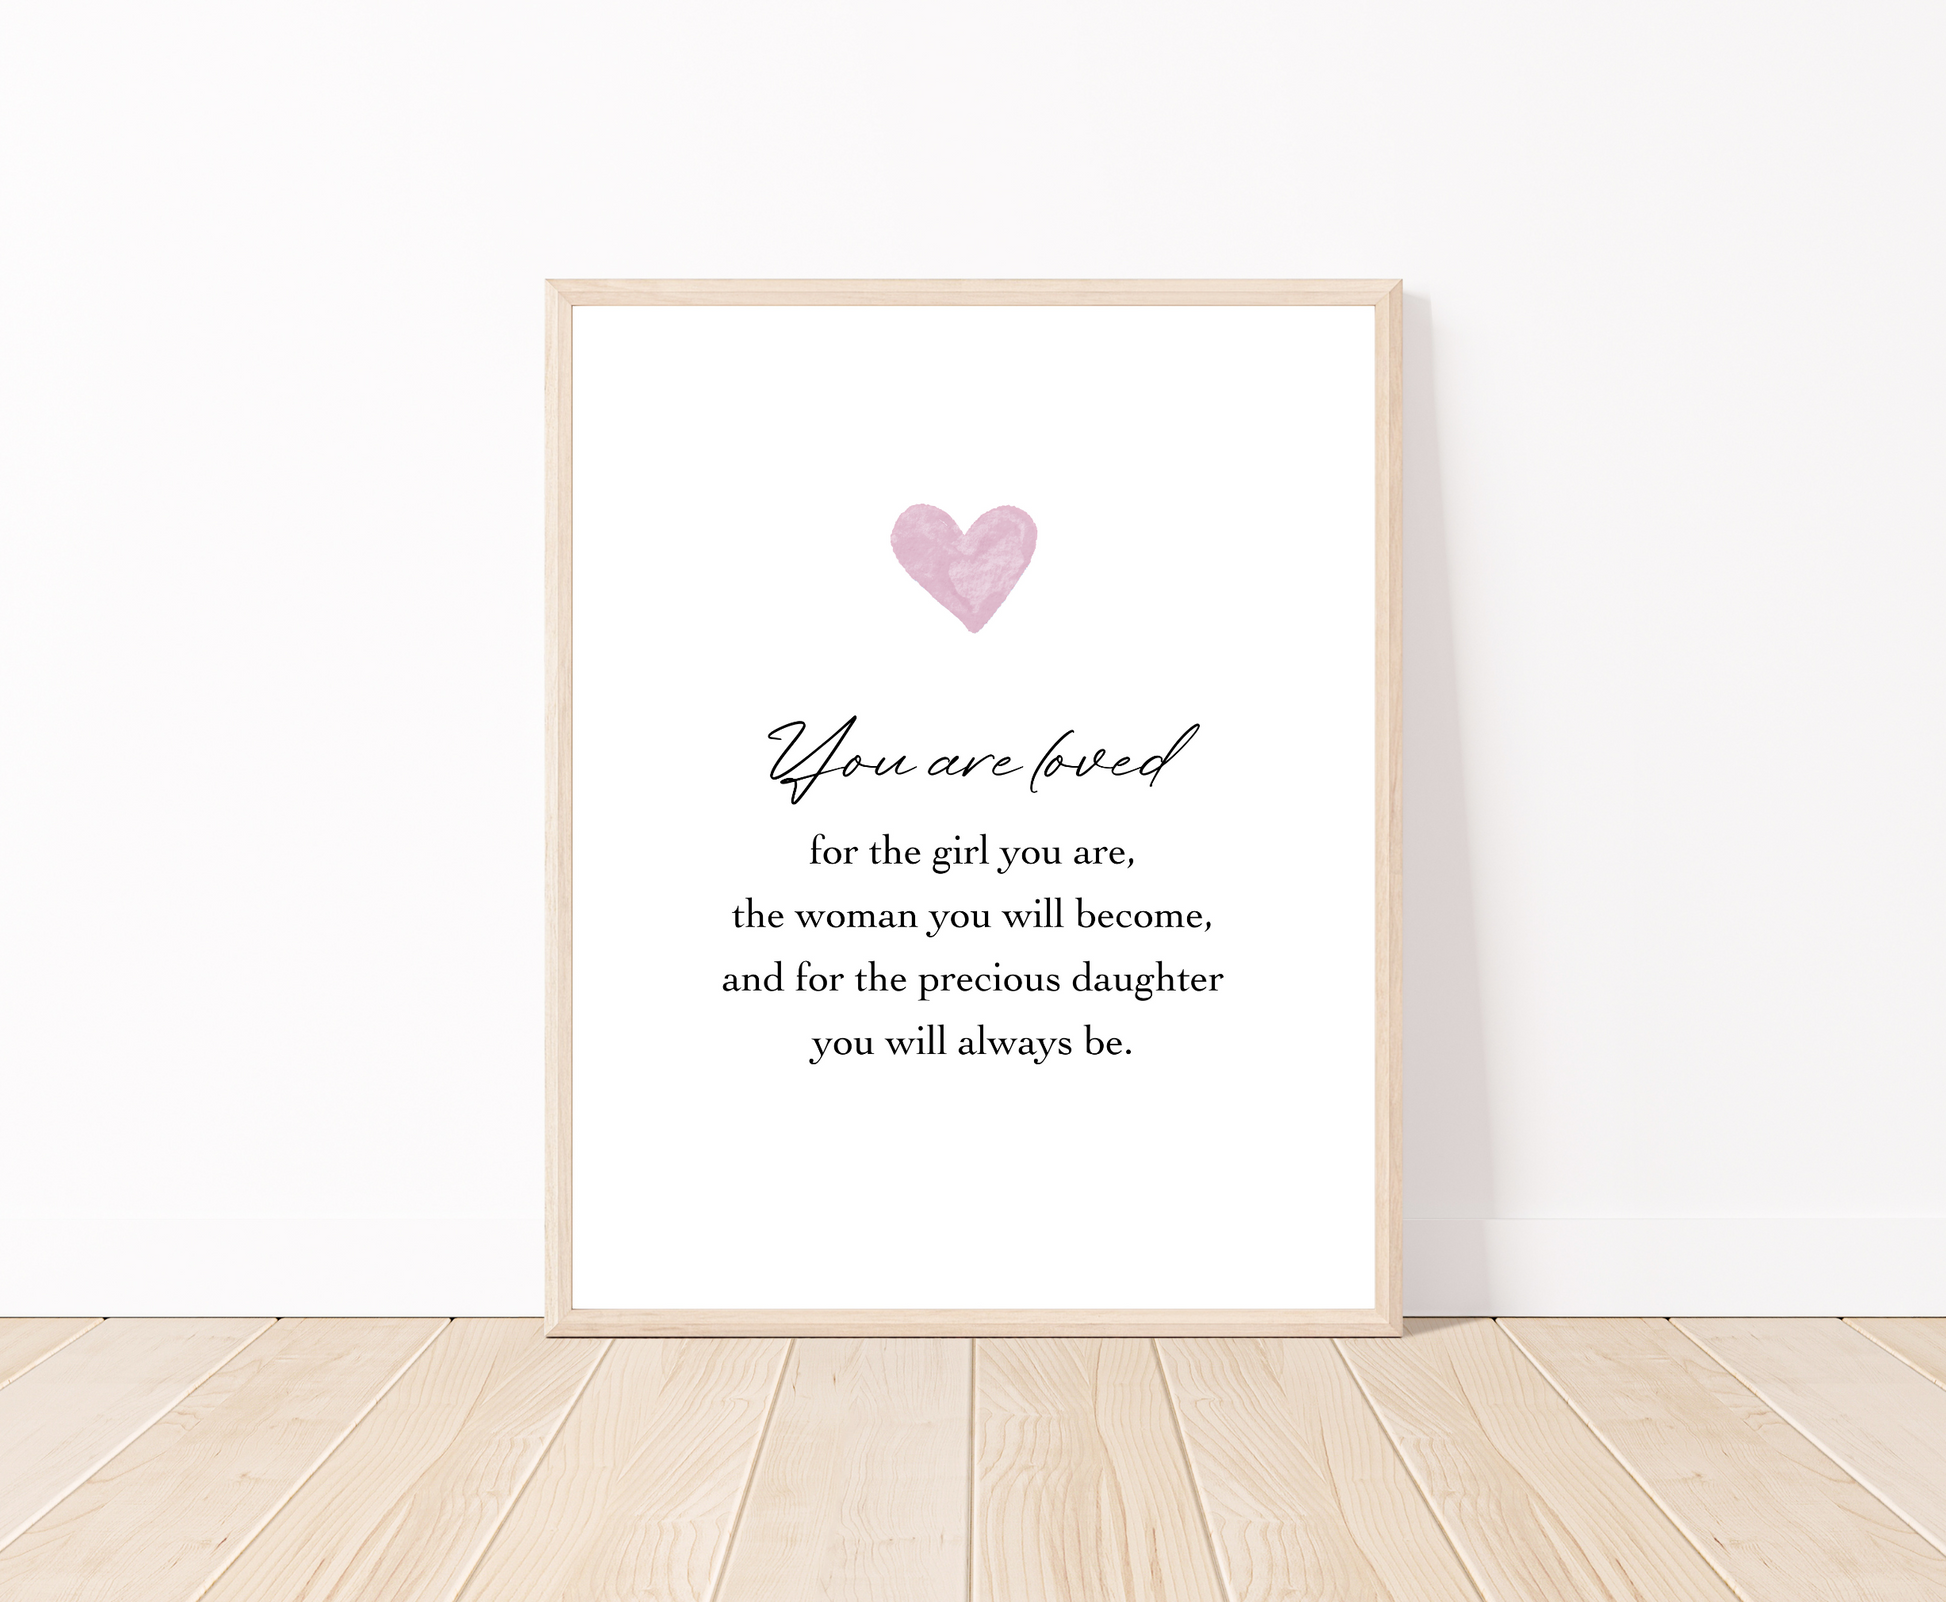 A digital poster is placed on a white wall and parquet flooring and has a pink heart at the top with a piece of writing that says: “You are loved for the girl you are, the woman you will become, and for the precious daughter you will always be.”